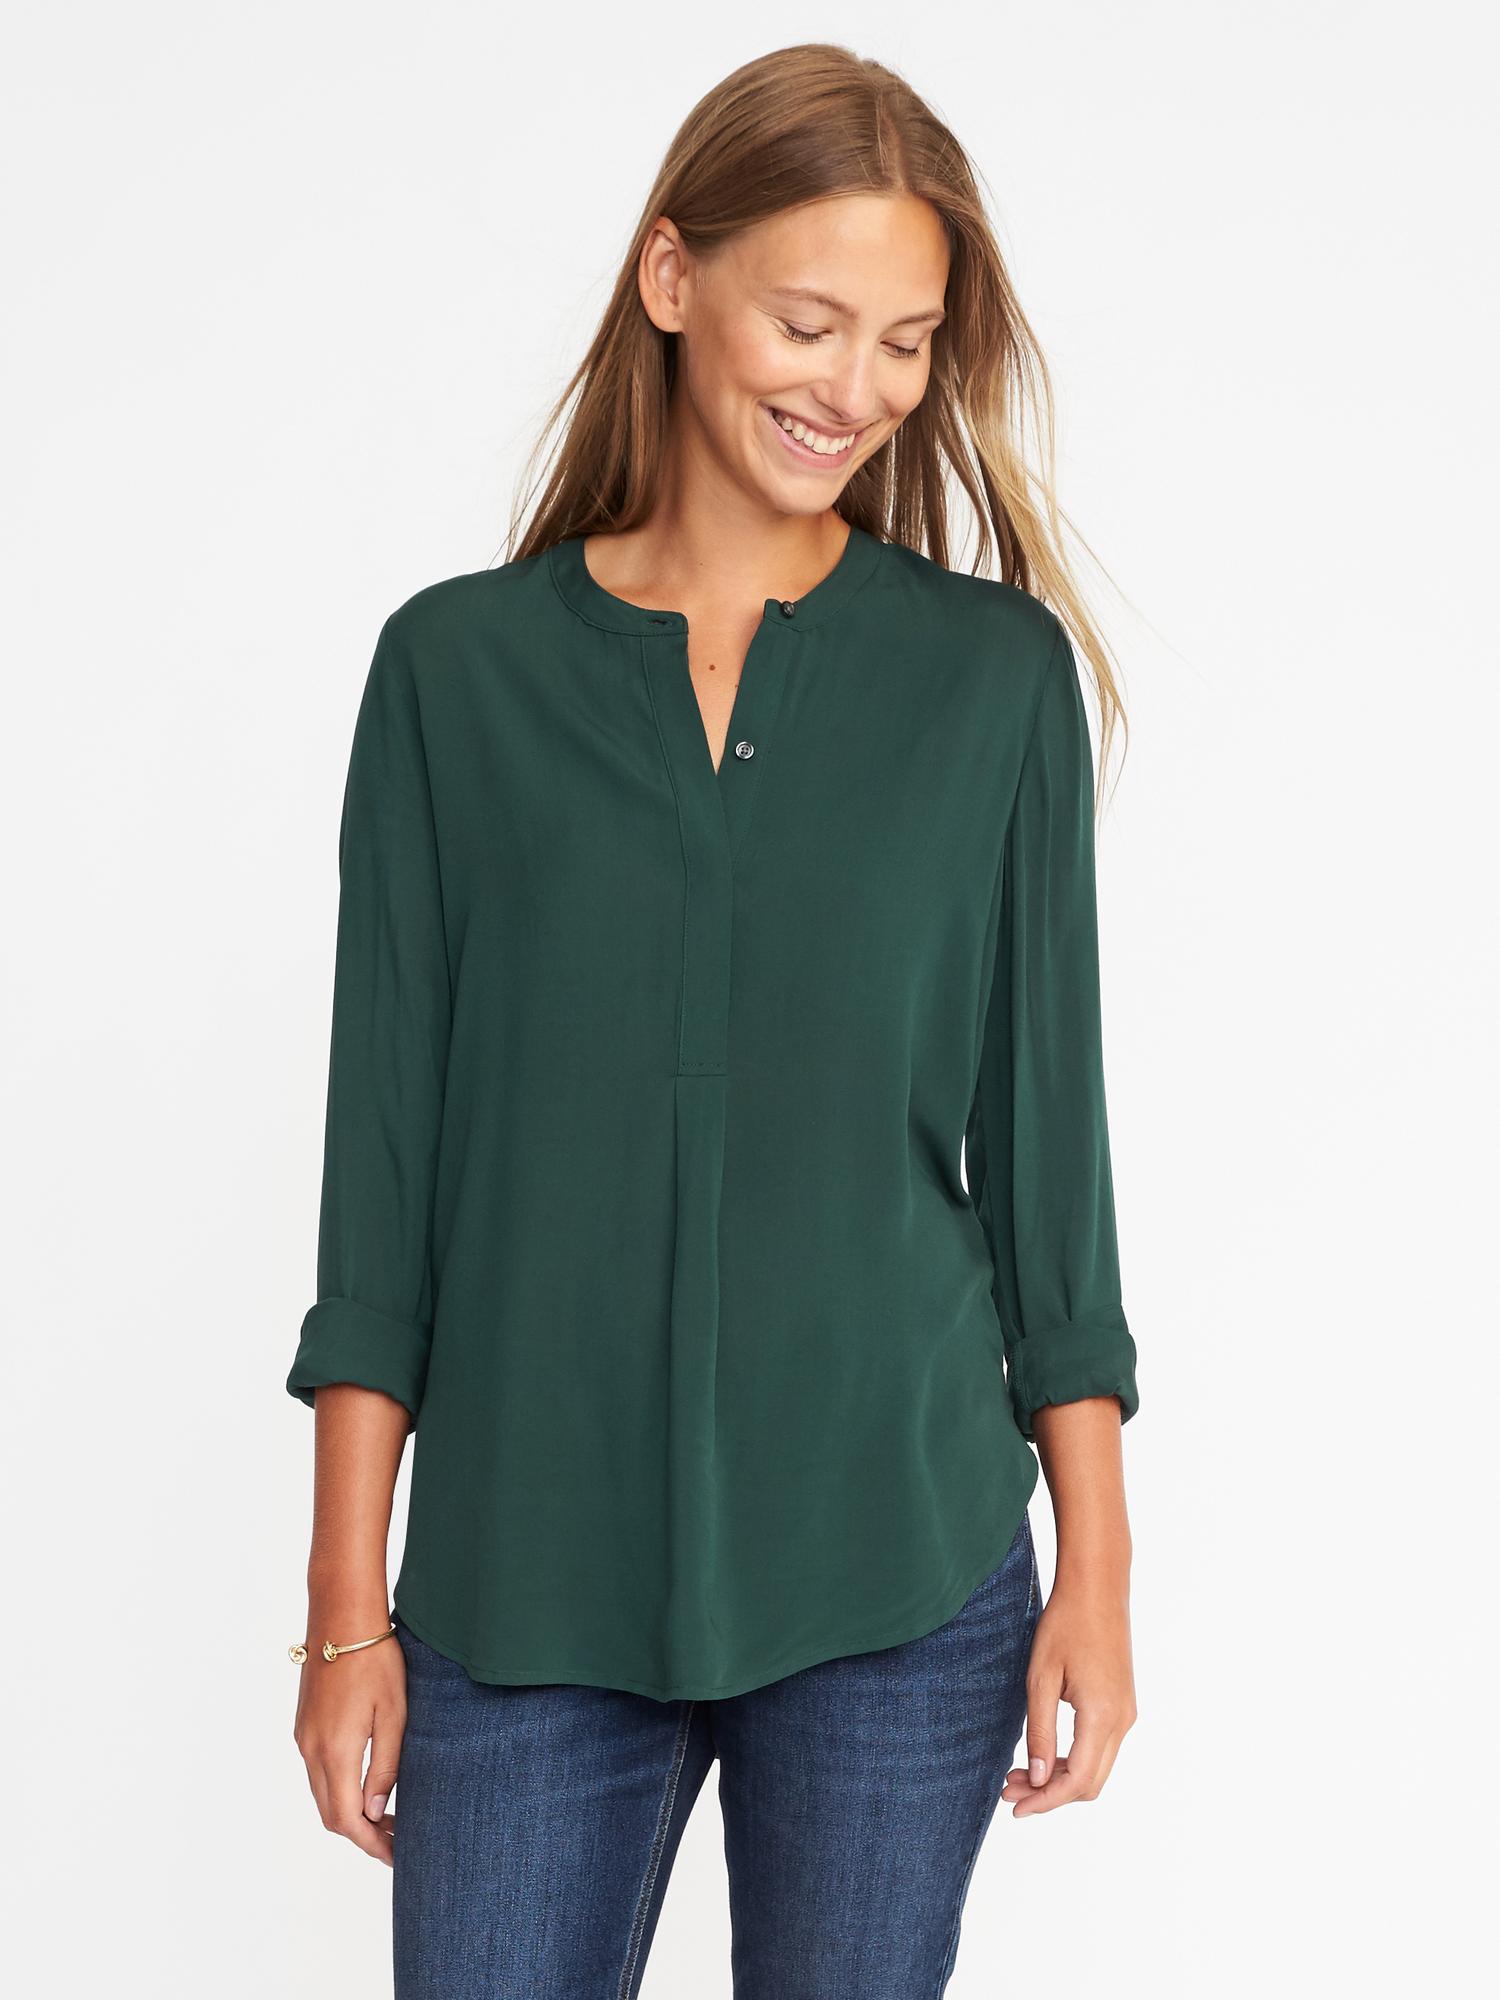 Relaxed Lightweight Tunic for Women | Old Navy